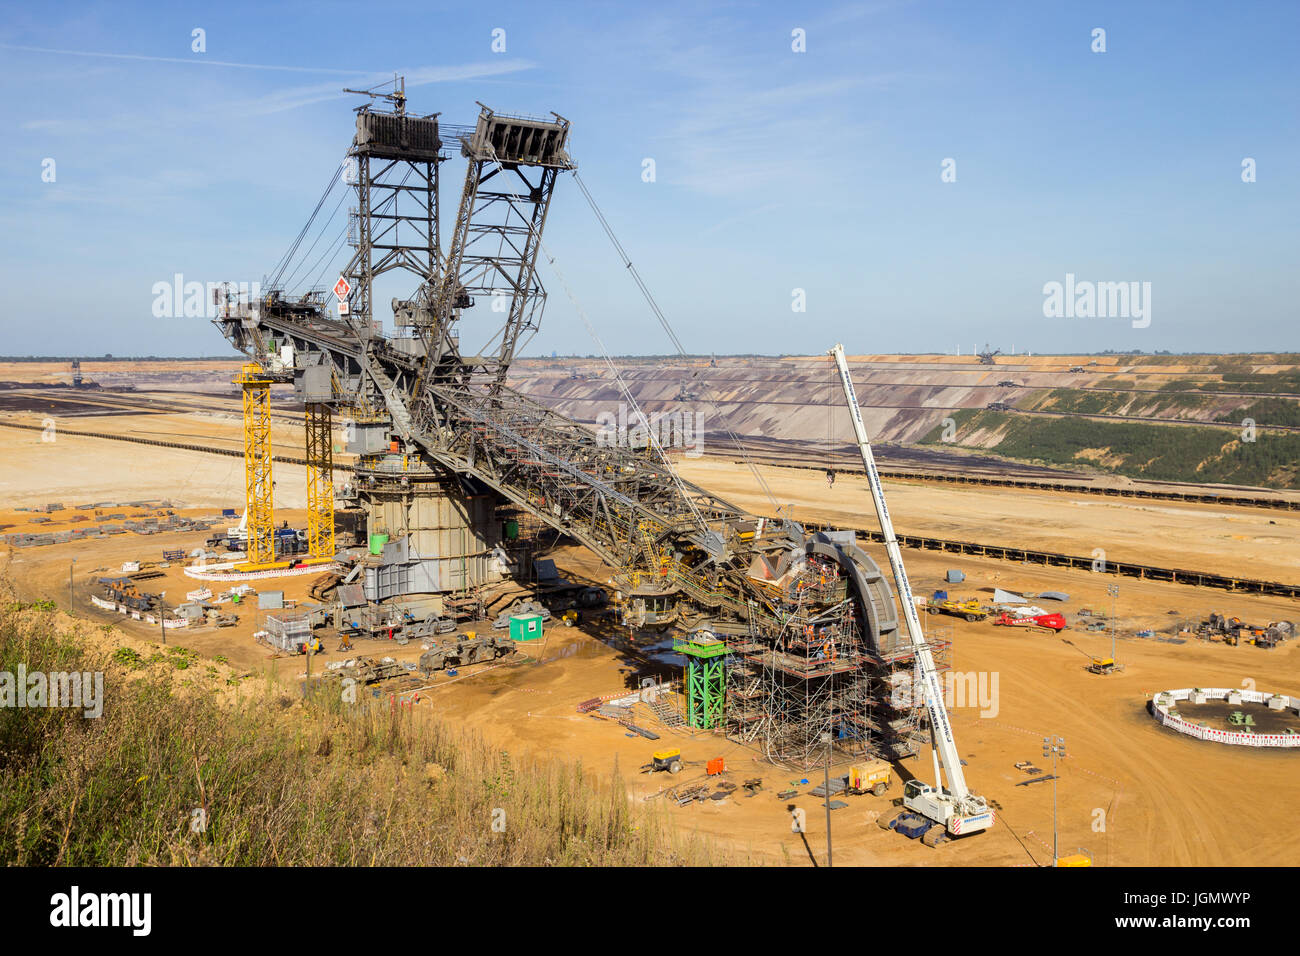 INDEN, GERMANY - JUNE 30, 2012: Construction of a large mining bucket-wheel excavator to dig for brown-coal in the open-pit mine at Inden, Germany. Stock Photo